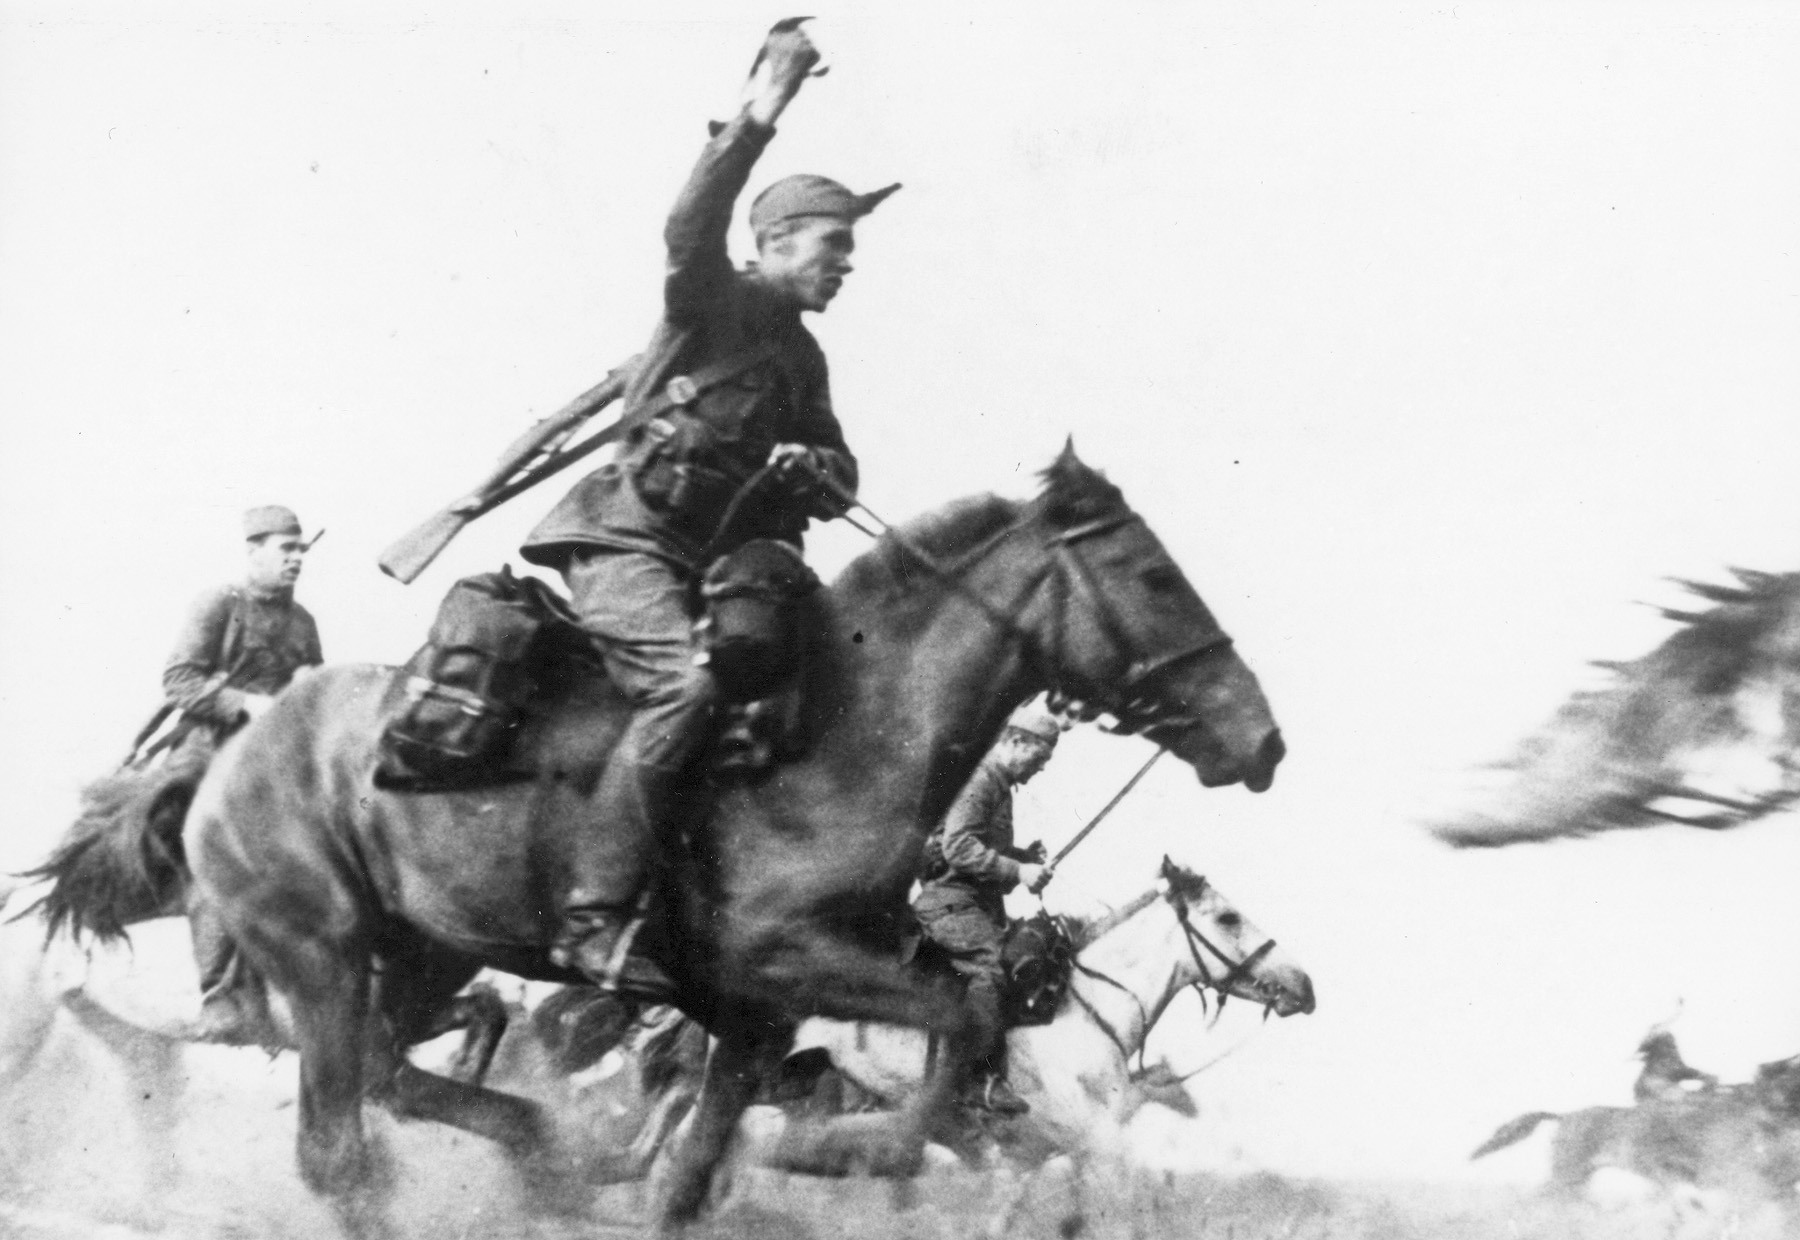 Cavalrymen of the Red Army gallop across the Russian steppe. Zhukov served in the cavalry under the Tsarist regime. 